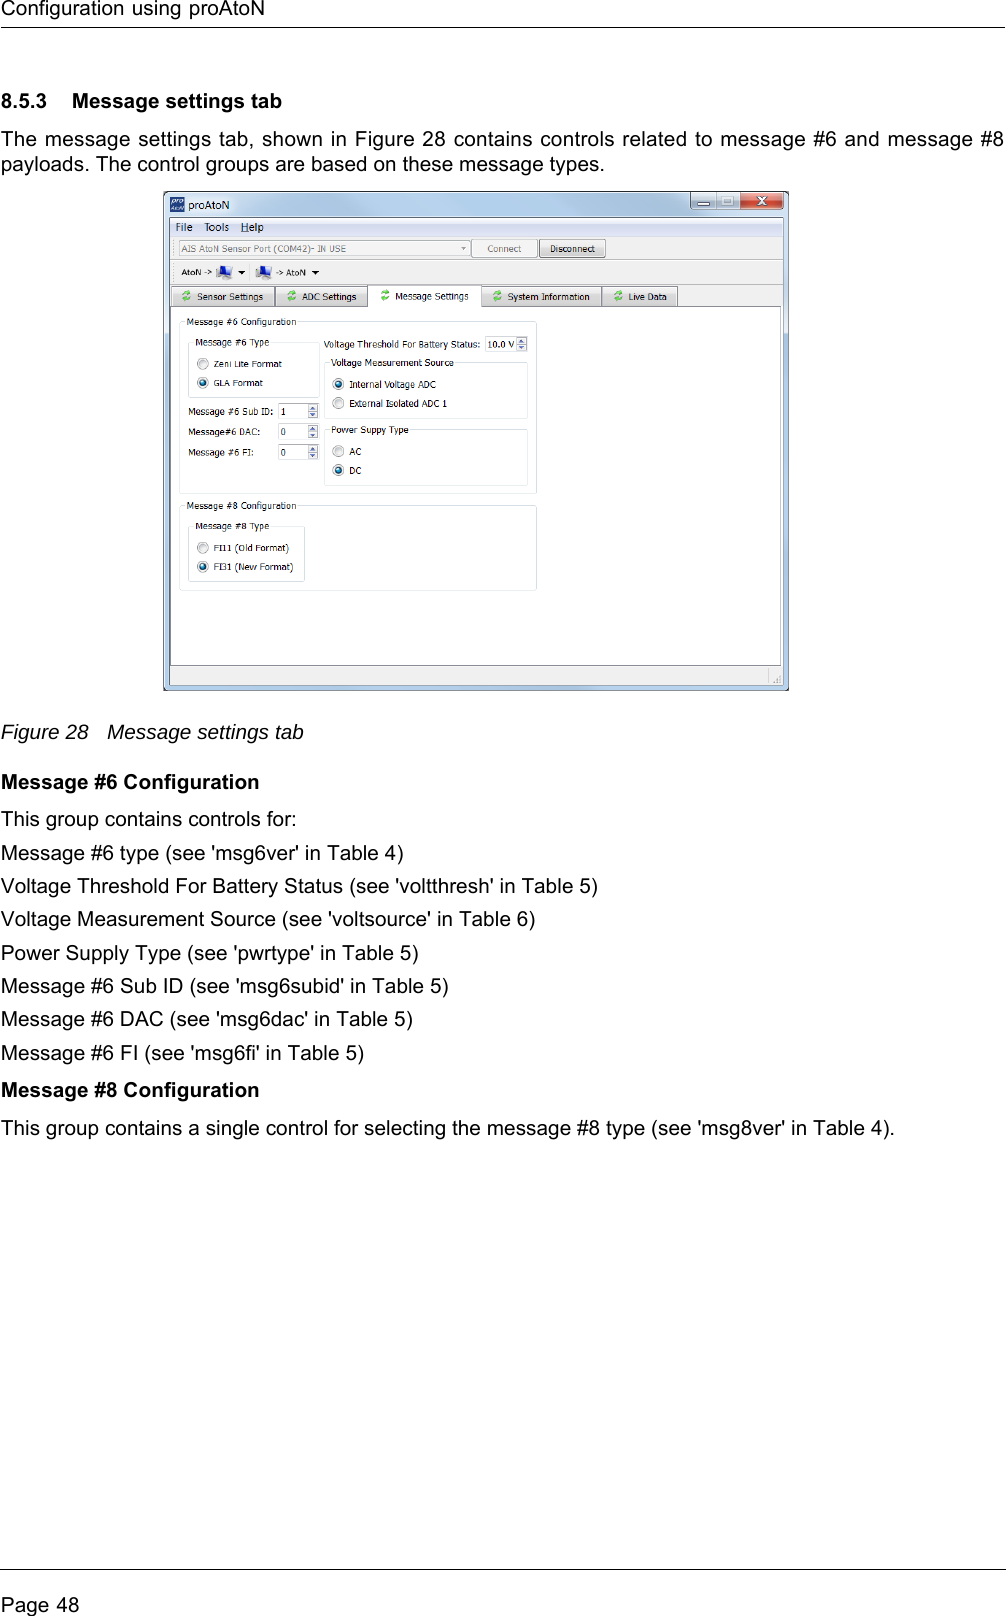 Configuration using proAtoNPage 488.5.3 Message settings tabThe message settings tab, shown in Figure 28 contains controls related to message #6 and message #8 payloads. The control groups are based on these message types.Figure 28 Message settings tabMessage #6 ConfigurationThis group contains controls for:Message #6 type (see &apos;msg6ver&apos; in Table 4)Voltage Threshold For Battery Status (see &apos;voltthresh&apos; in Table 5)Voltage Measurement Source (see &apos;voltsource&apos; in Table 6)Power Supply Type (see &apos;pwrtype&apos; in Table 5)Message #6 Sub ID (see &apos;msg6subid&apos; in Table 5)Message #6 DAC (see &apos;msg6dac&apos; in Table 5)Message #6 FI (see &apos;msg6fi&apos; in Table 5)Message #8 ConfigurationThis group contains a single control for selecting the message #8 type (see &apos;msg8ver&apos; in Table 4).